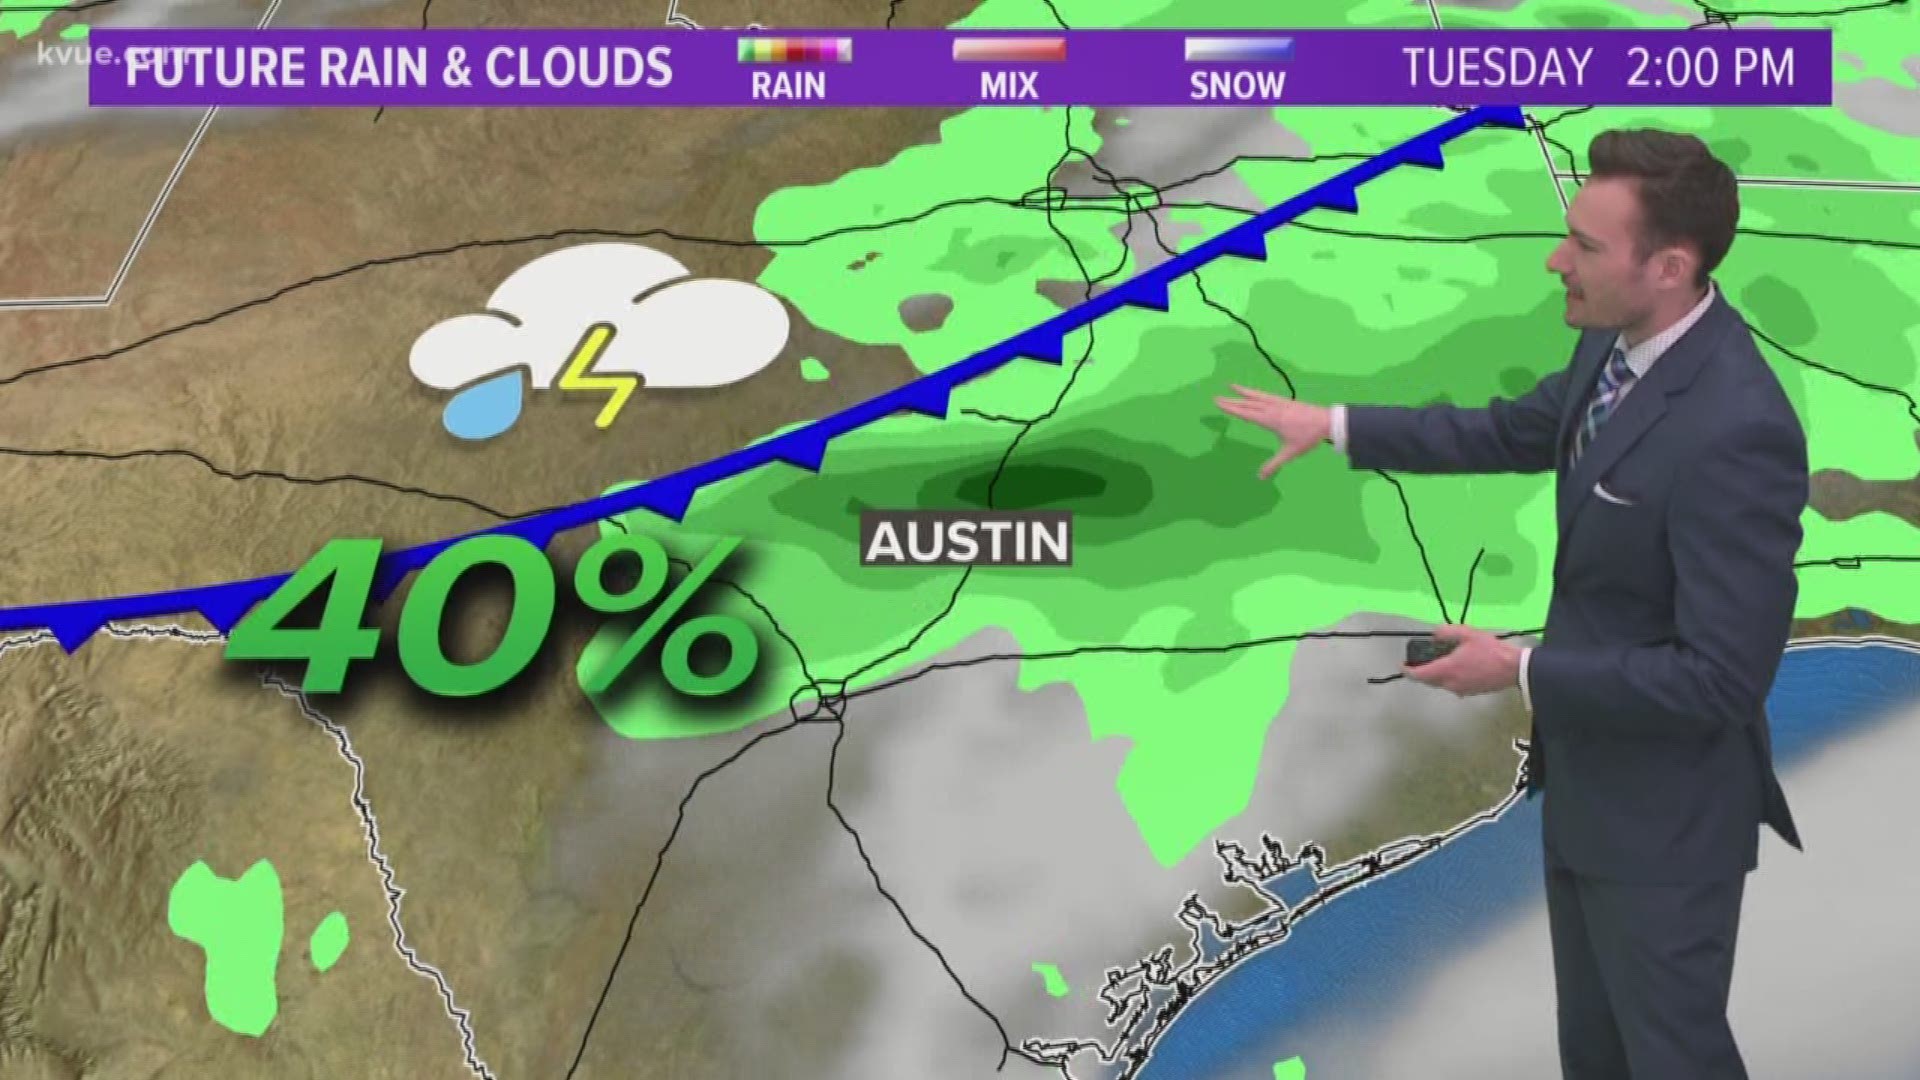 KVUE Weather Forecast